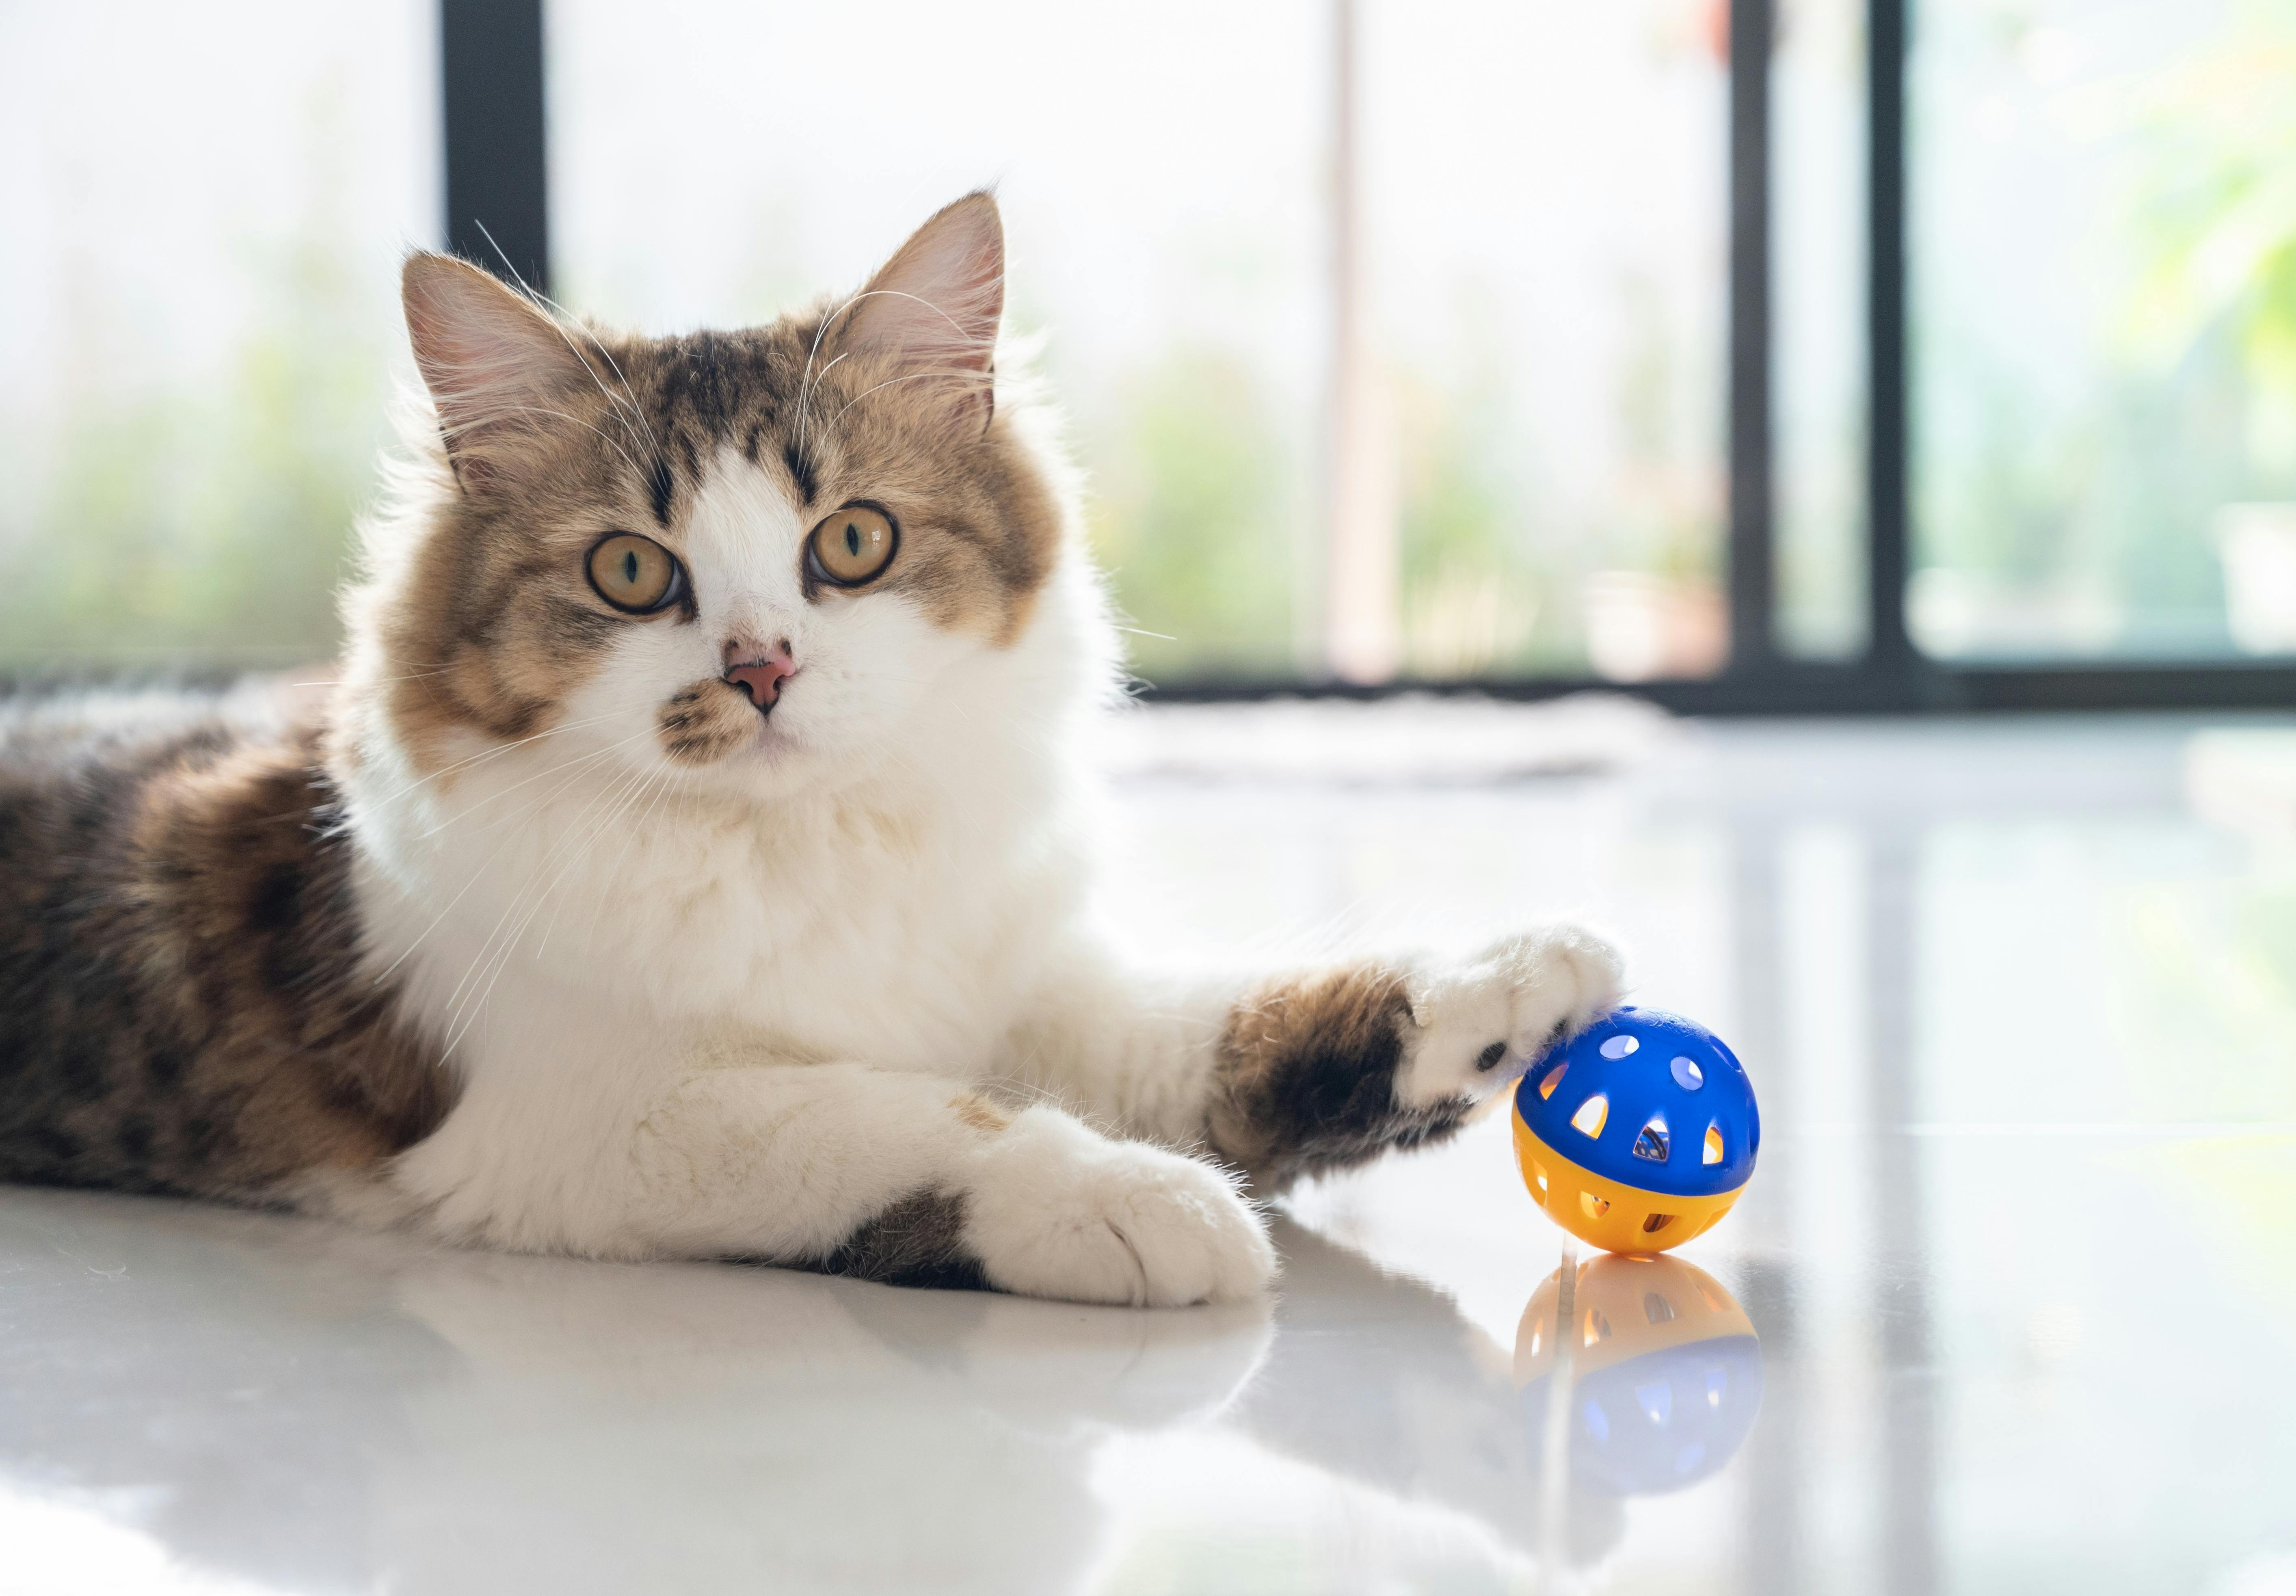 The best cat gifts based on breed